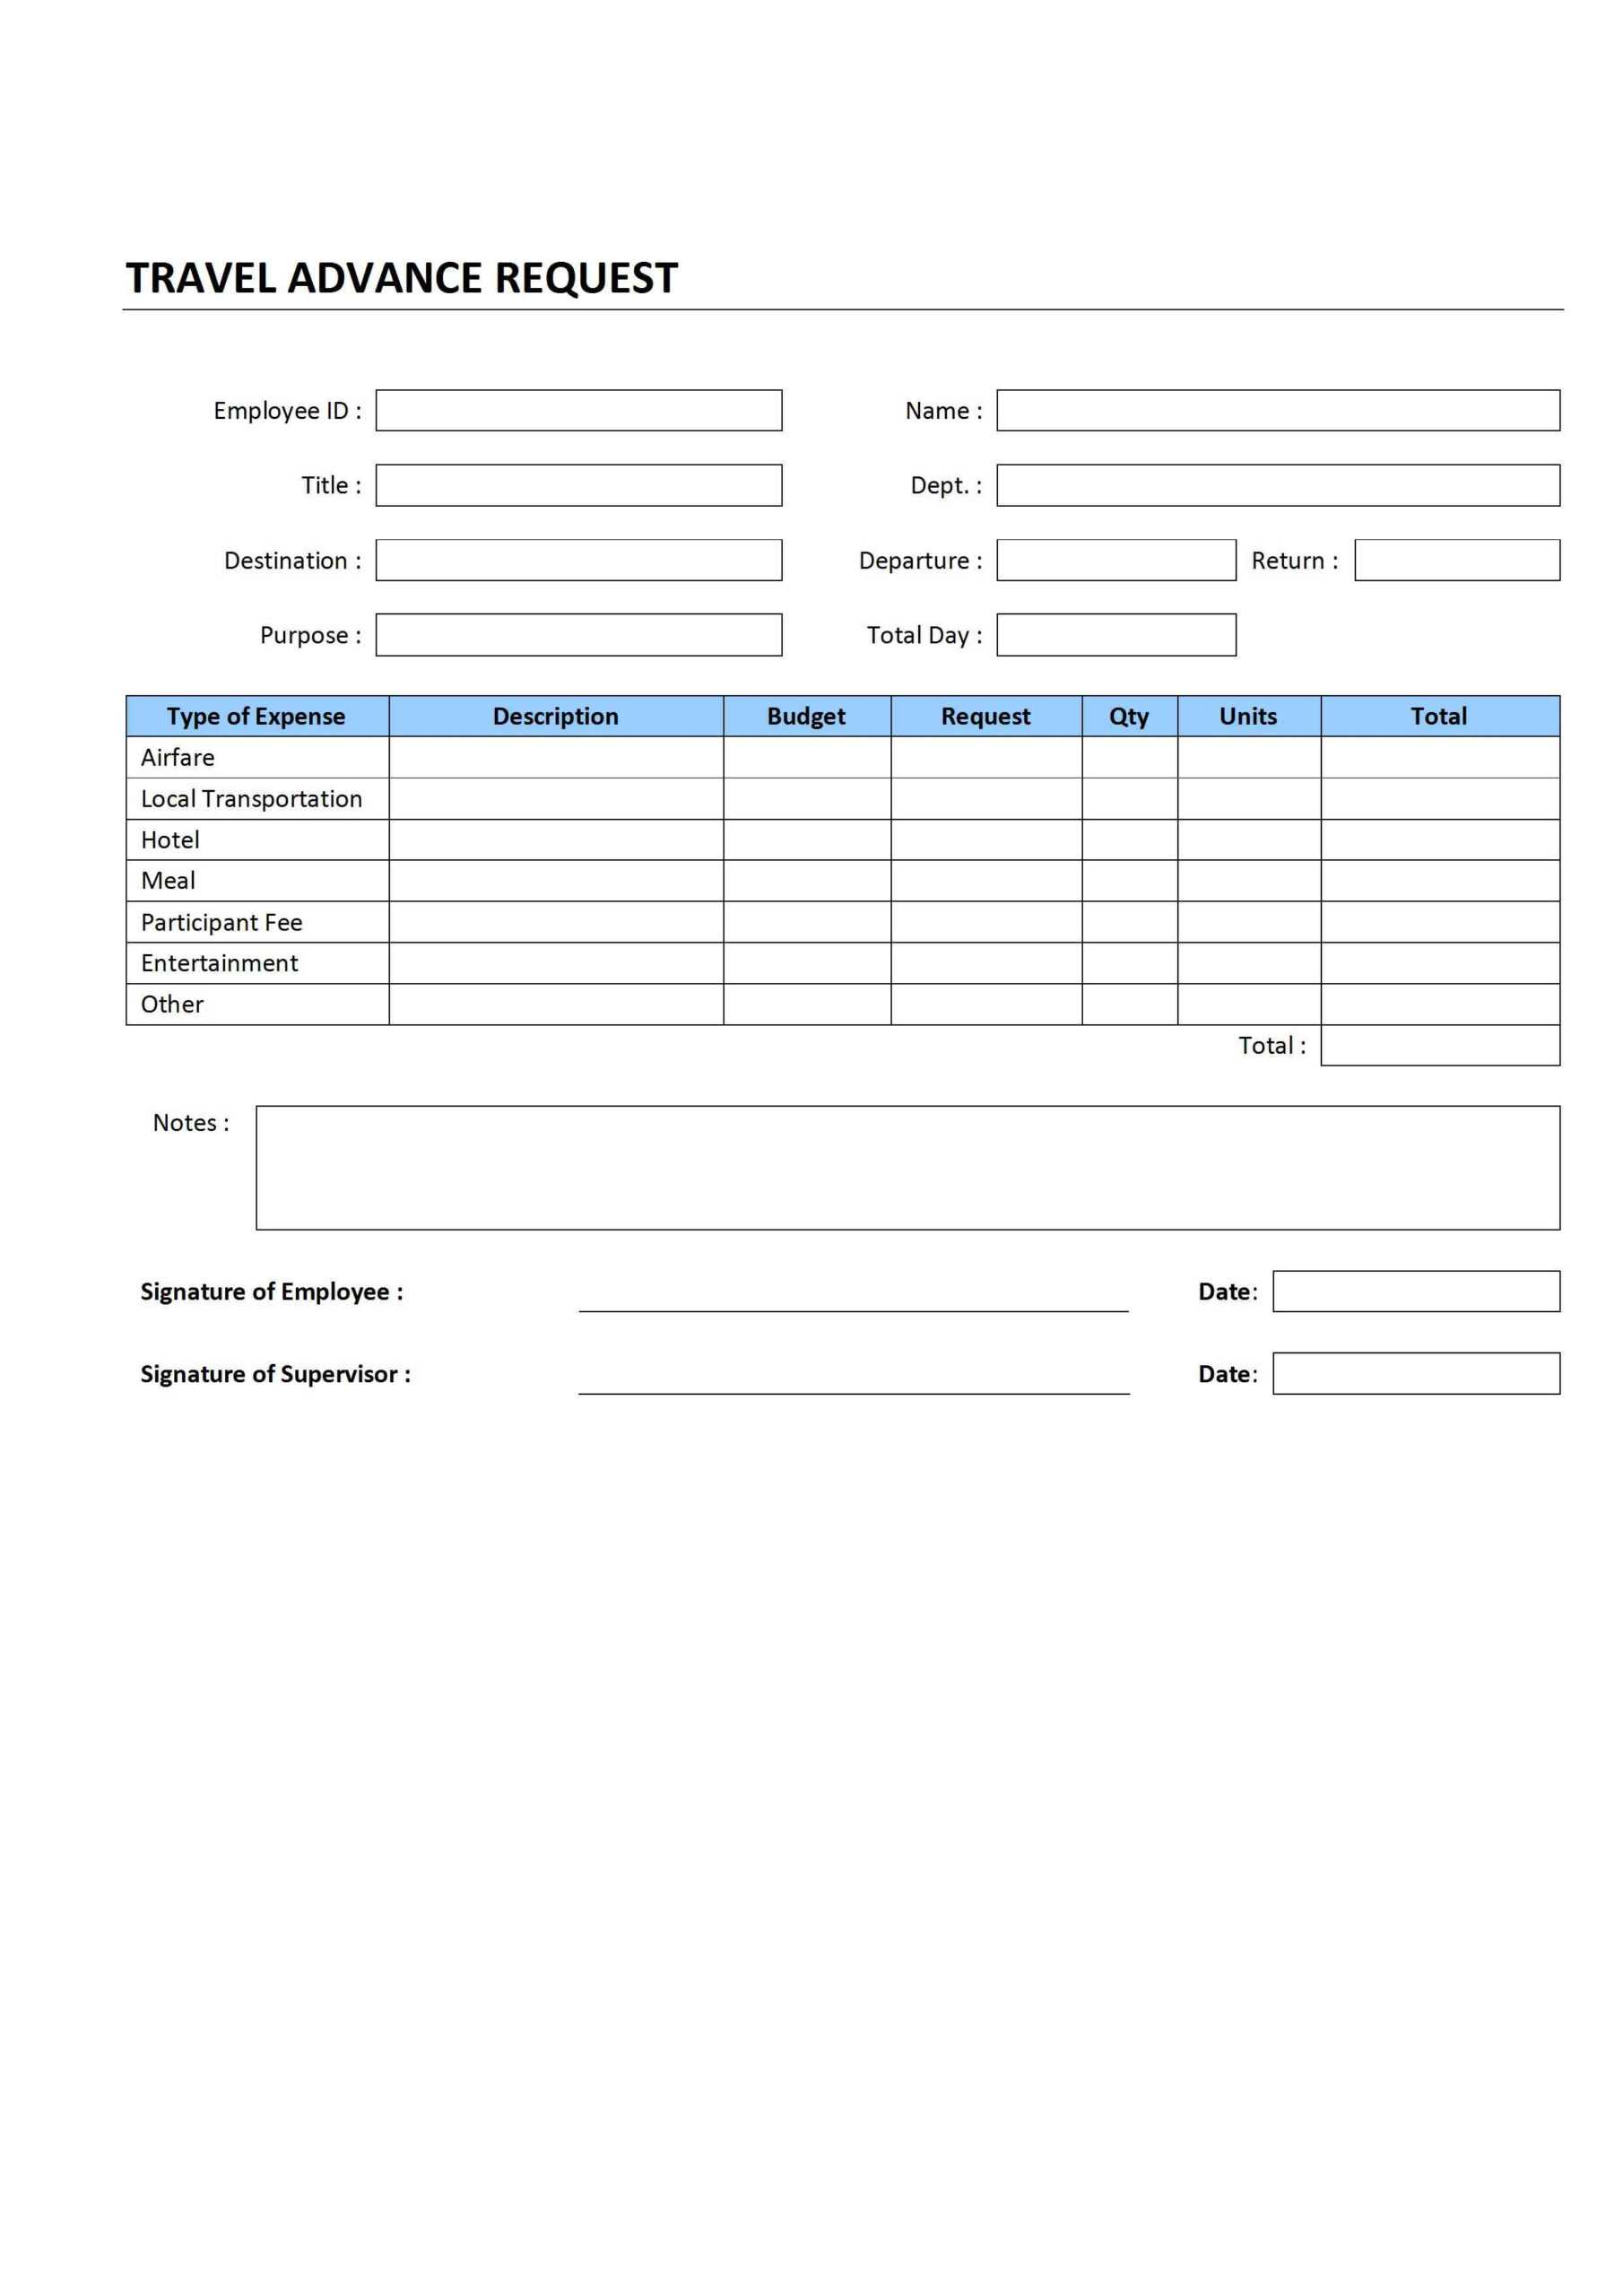 5 Best Photos Of Sample Travel Request Form – Travel Request For Travel Request Form Template Word